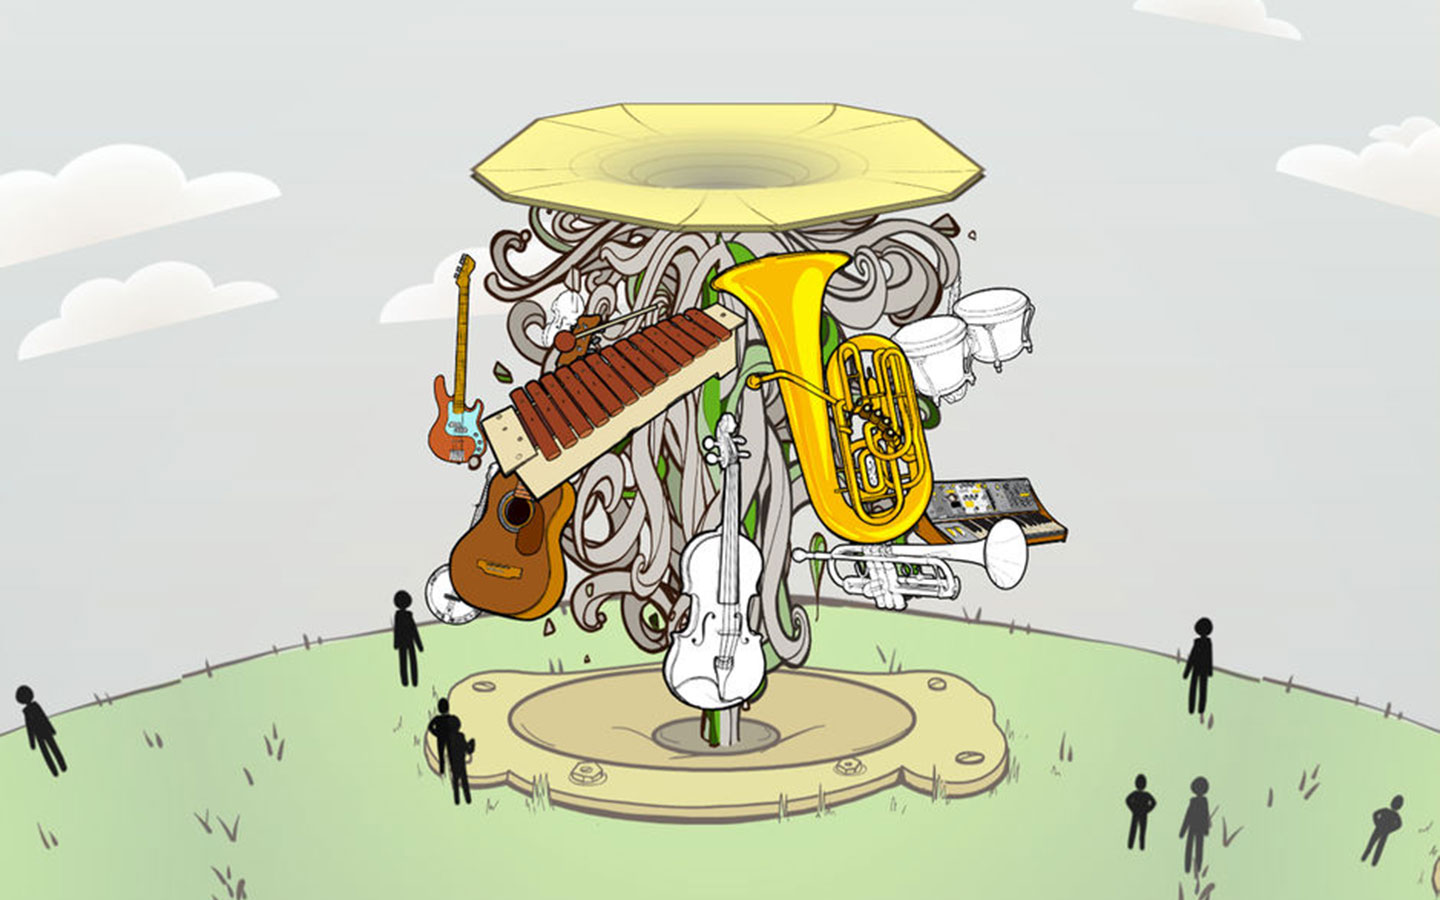 A graphic showing a group of musical instruments